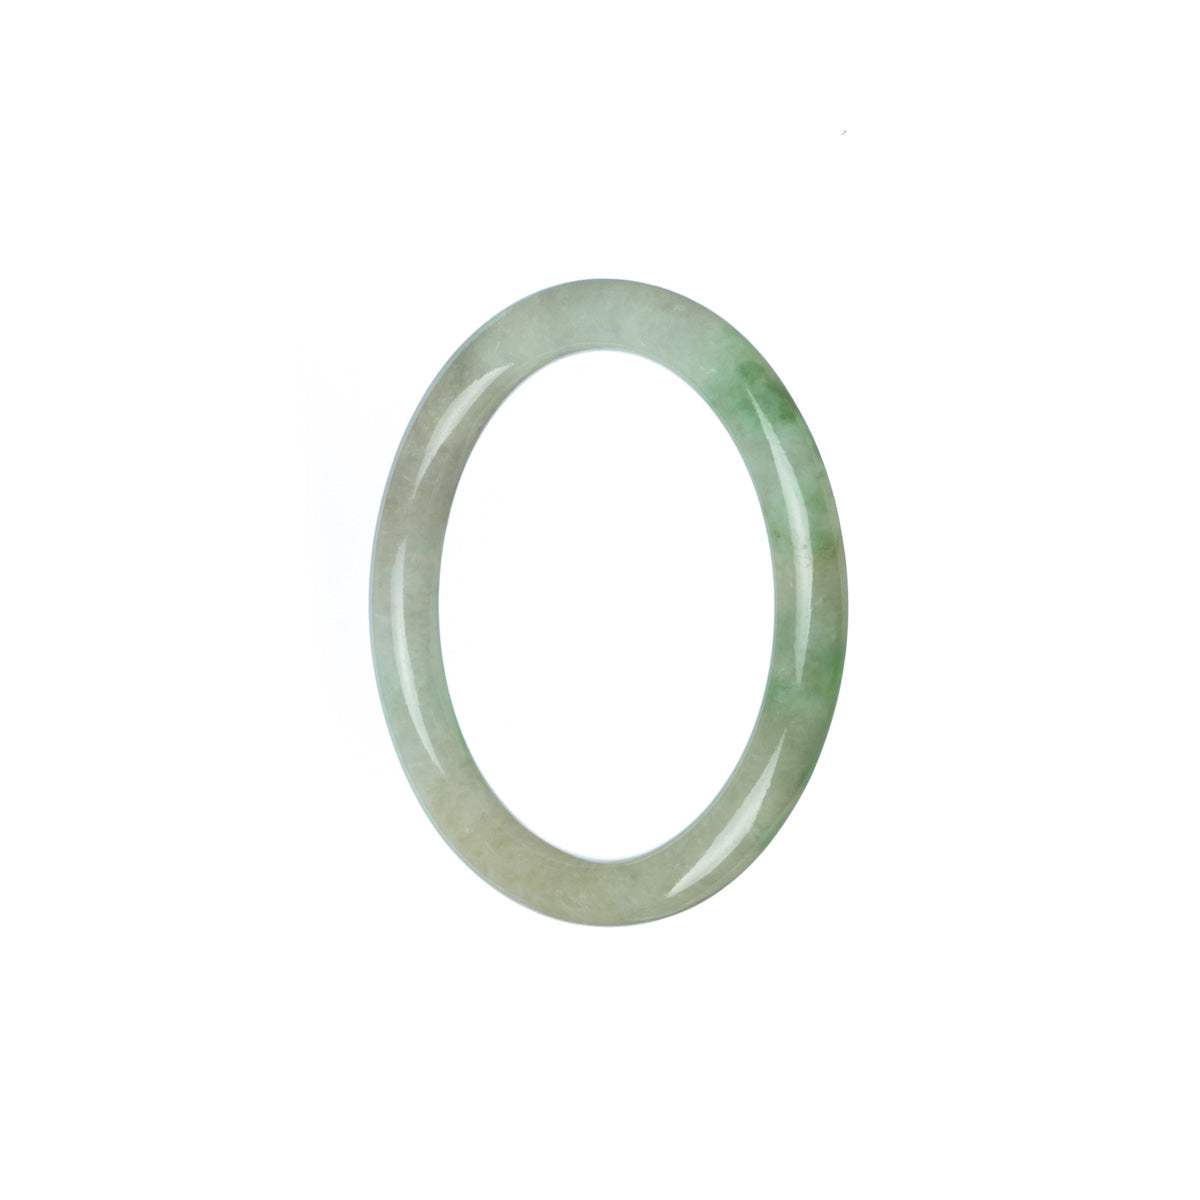 A round, child-sized jade bangle bracelet in a beautiful green and white color.